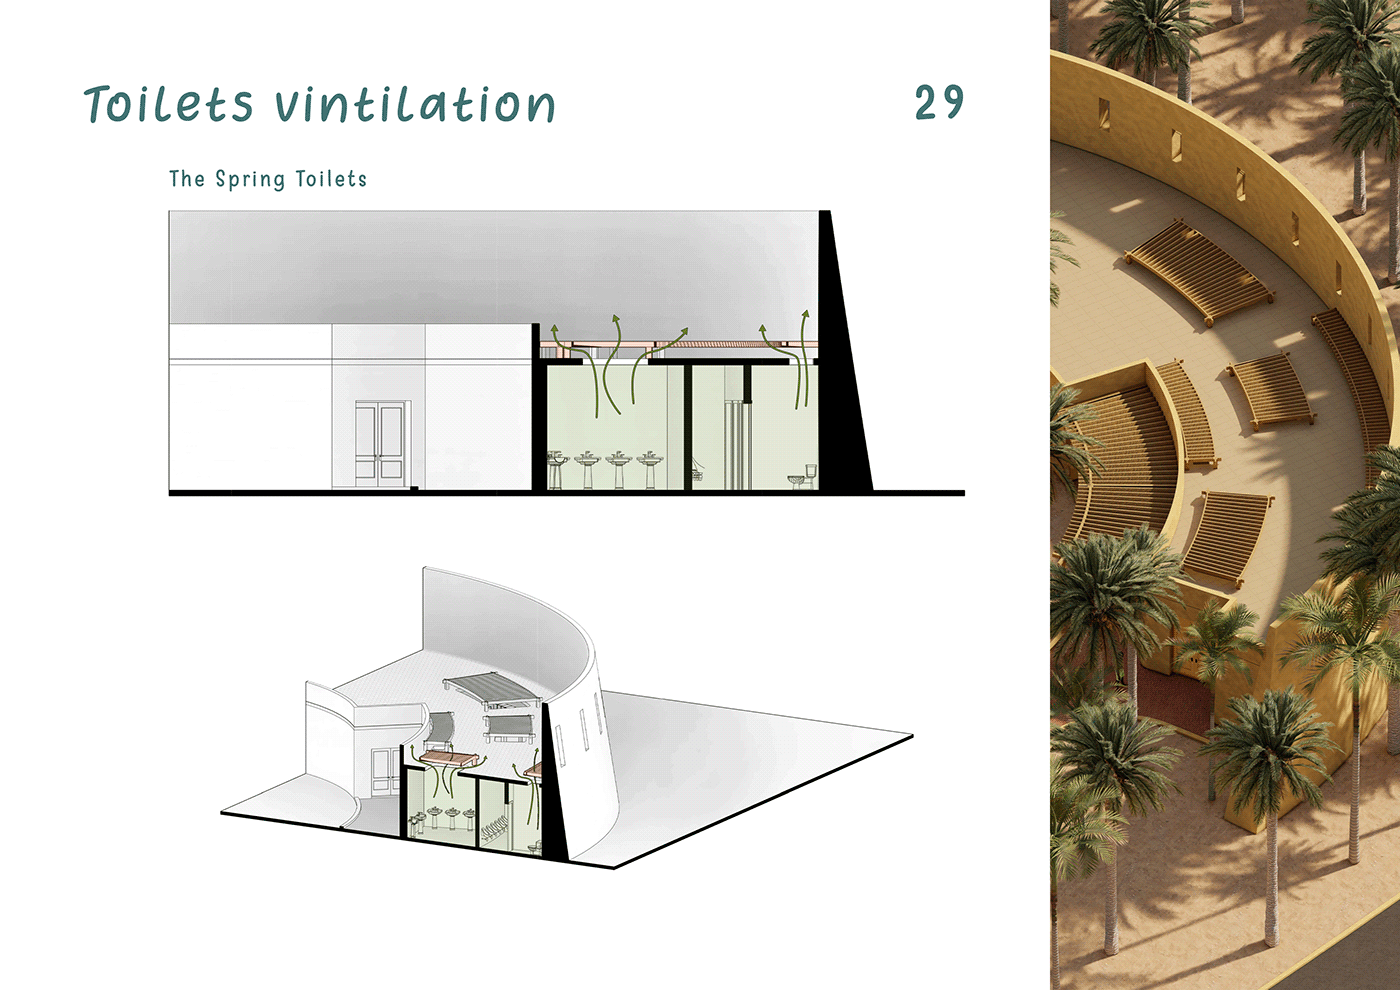 graduation project Siwa Oasis resort Entertainment architecture Biophilic Design Recreational concept Day-use